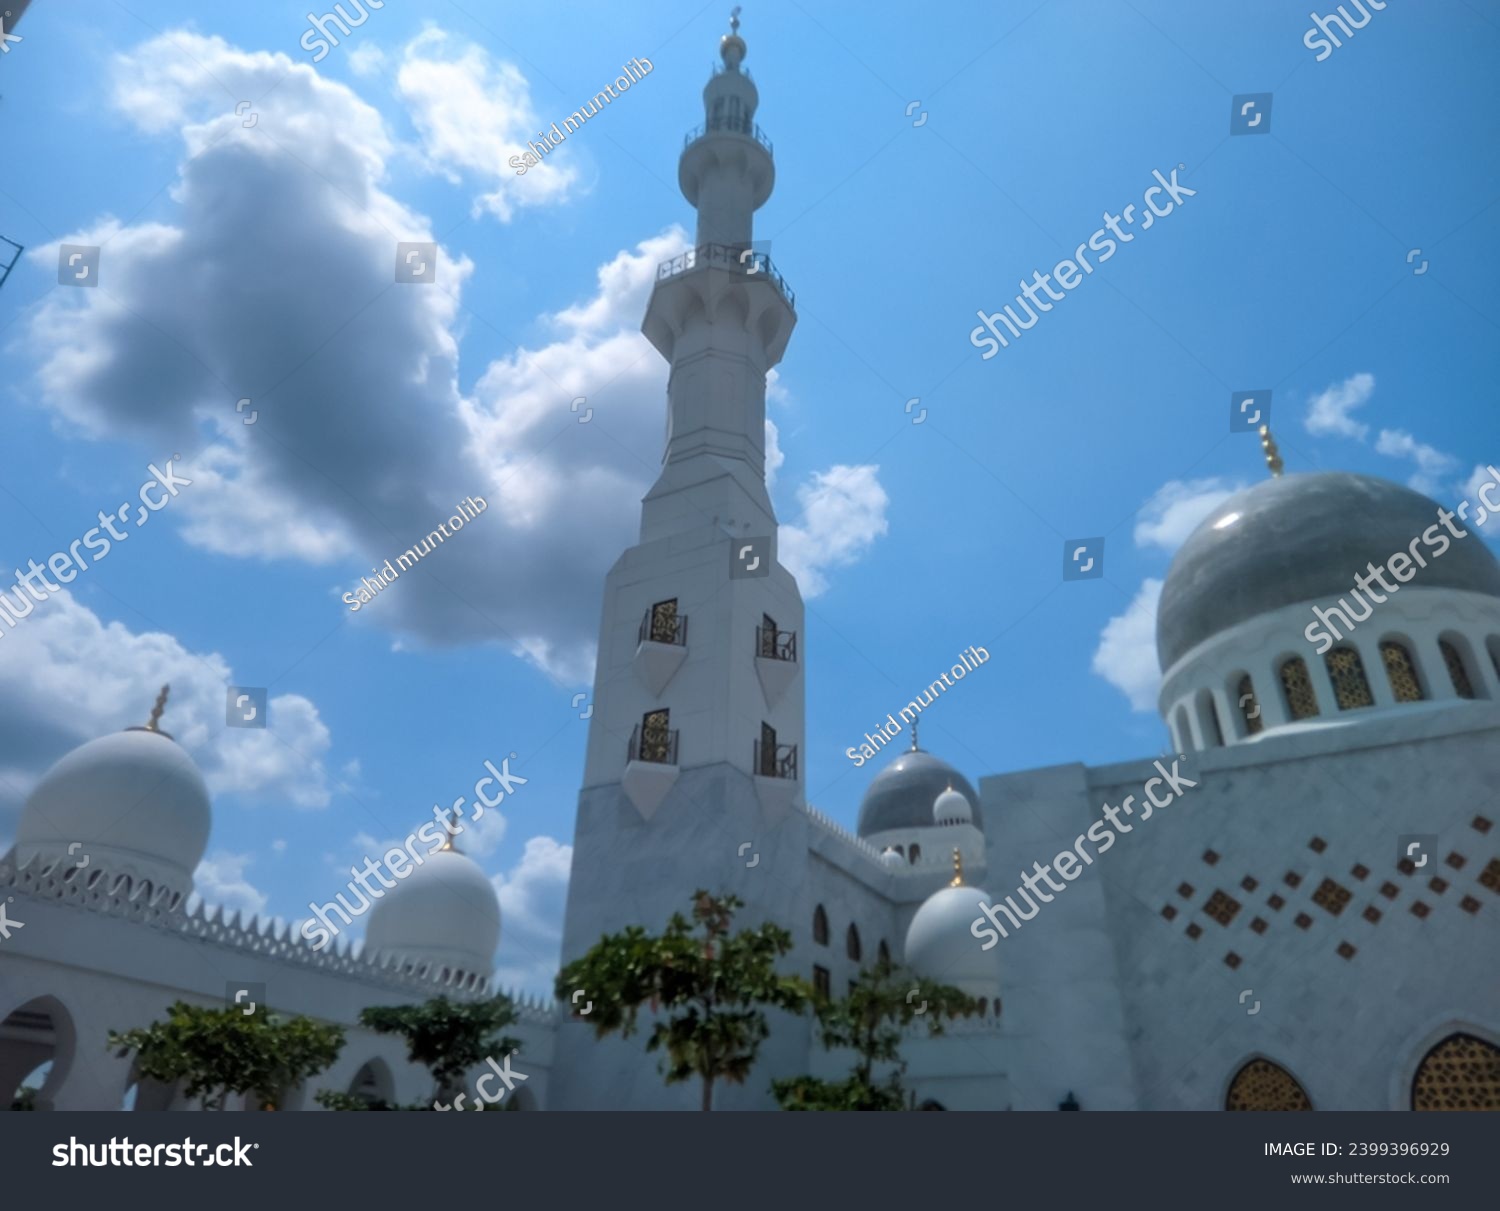 You can see the mosque dome and mosque tower high in the bright blue sky and white clouds of the Syech Zayed mosque building in Solo, Central Java, Indonesia  #2399396929